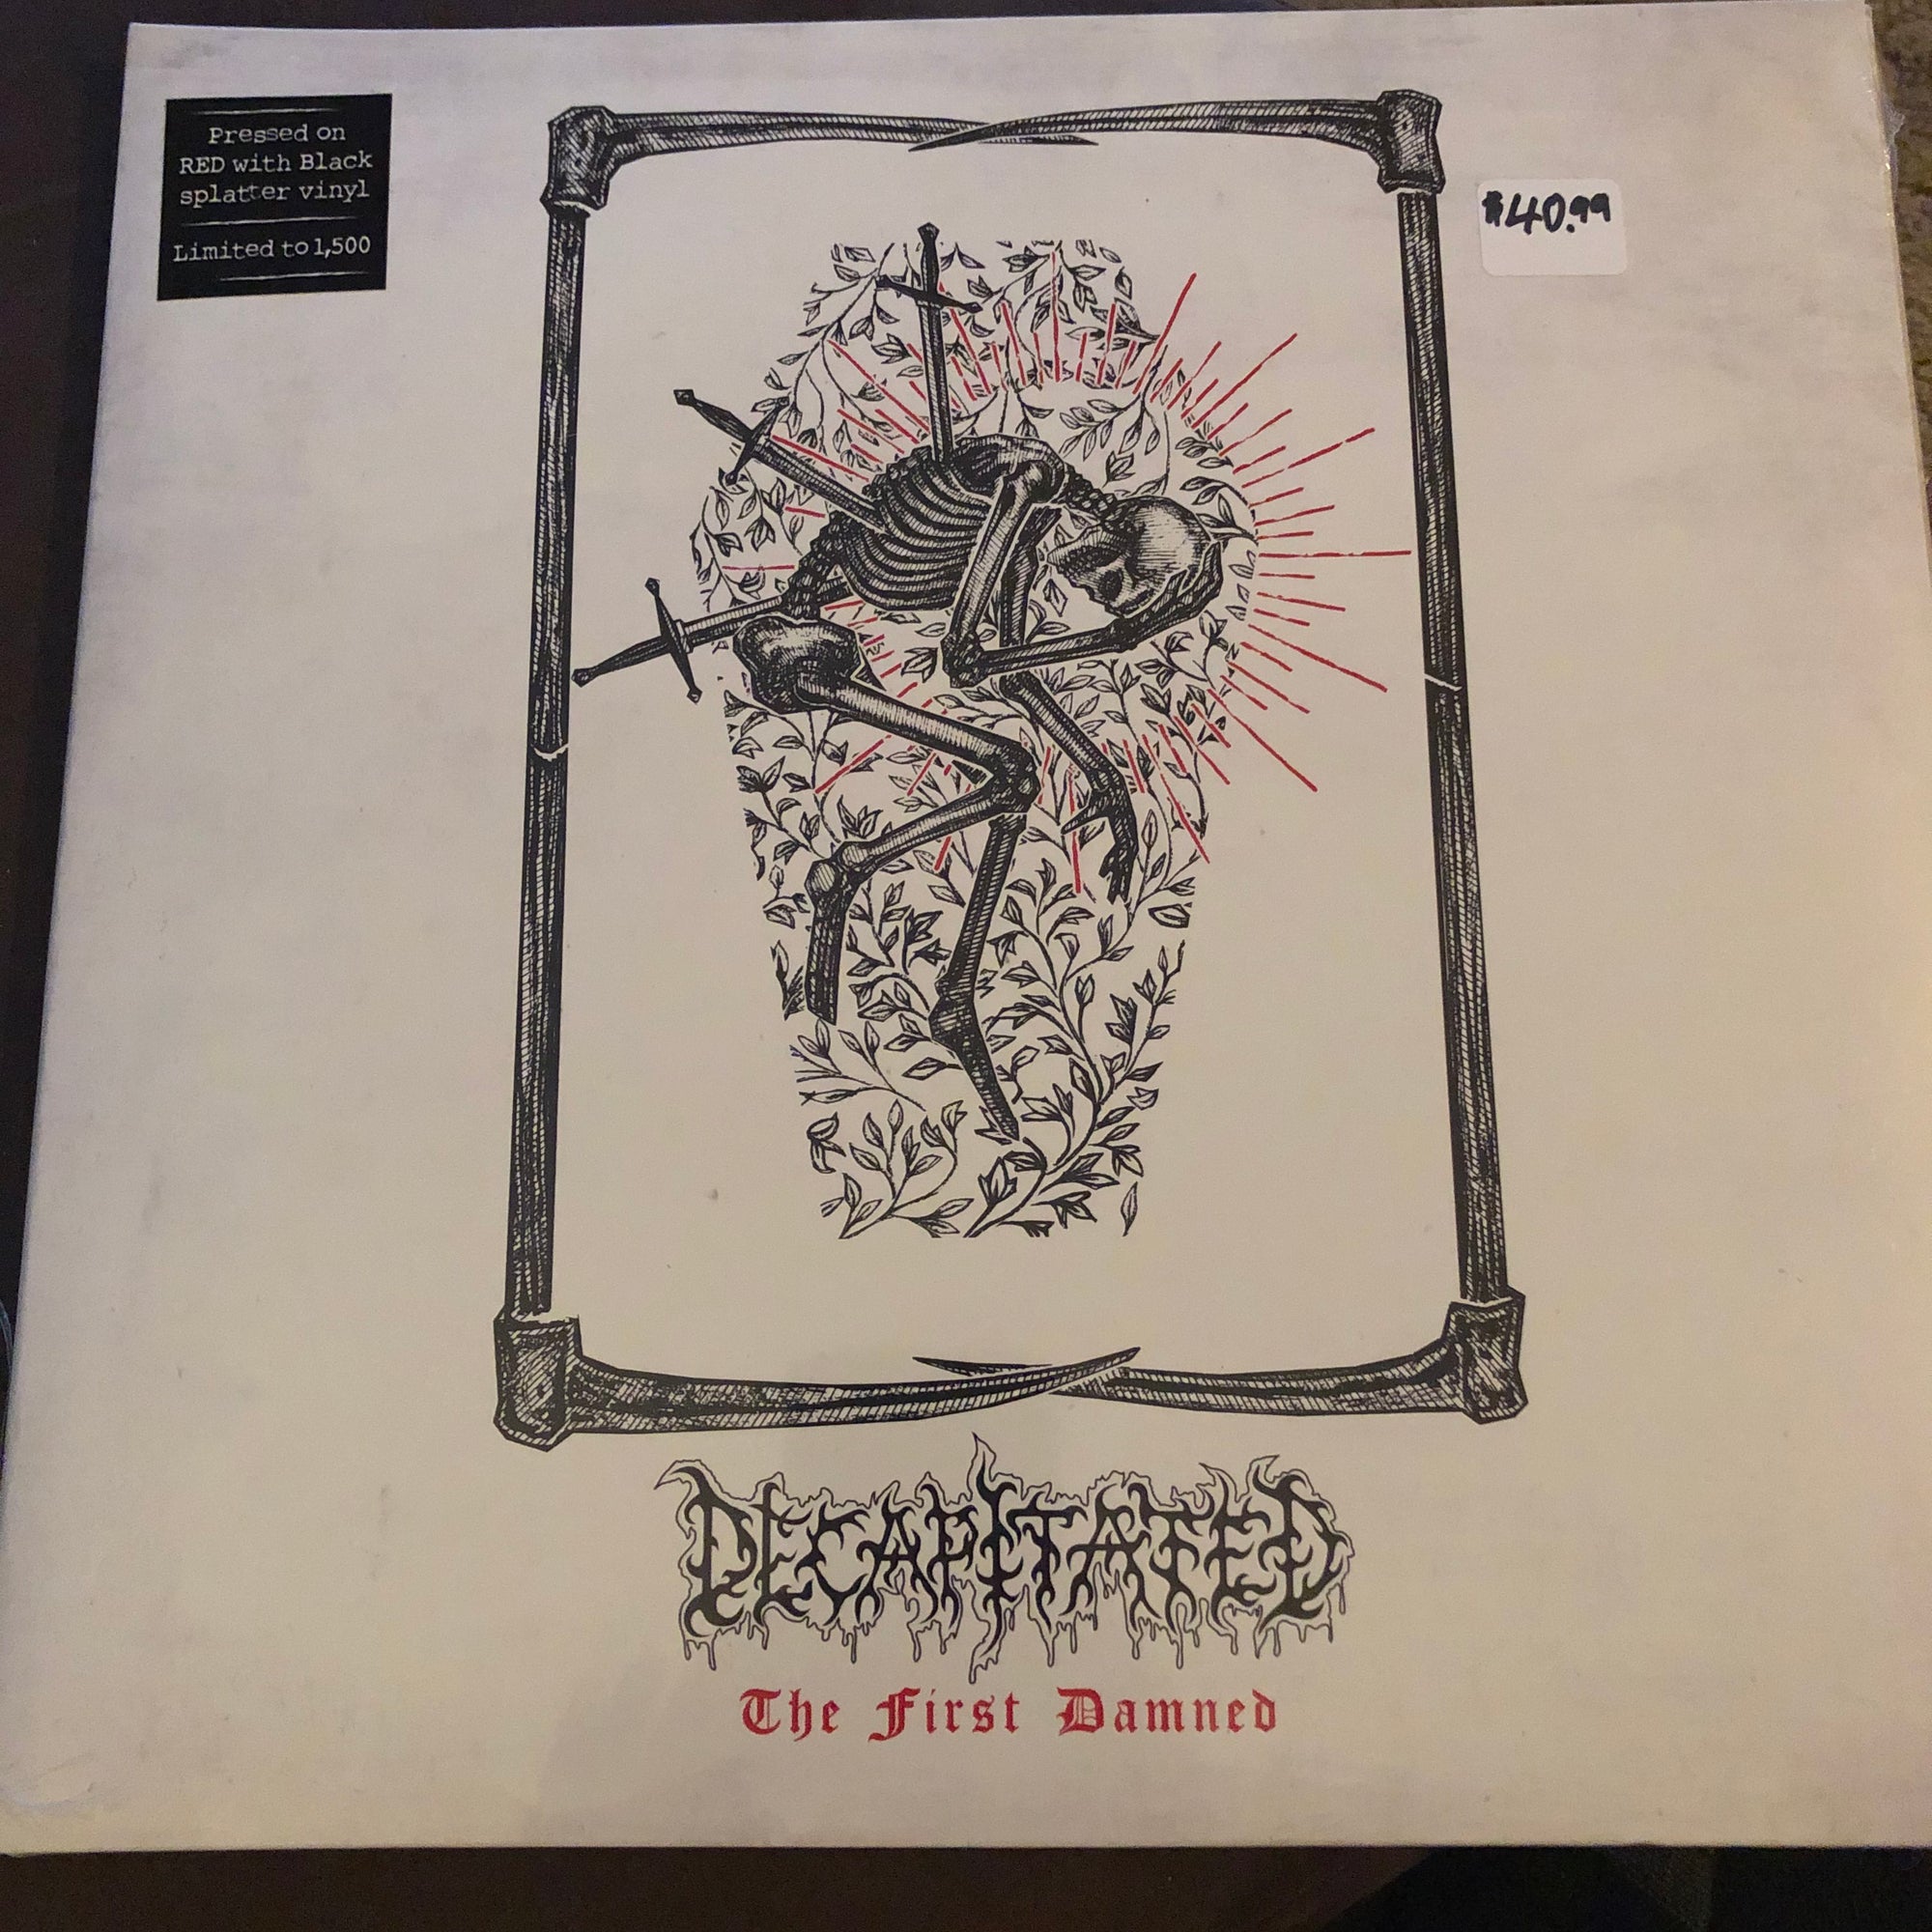 Decapitated - The First Damned (Vinyl LP)